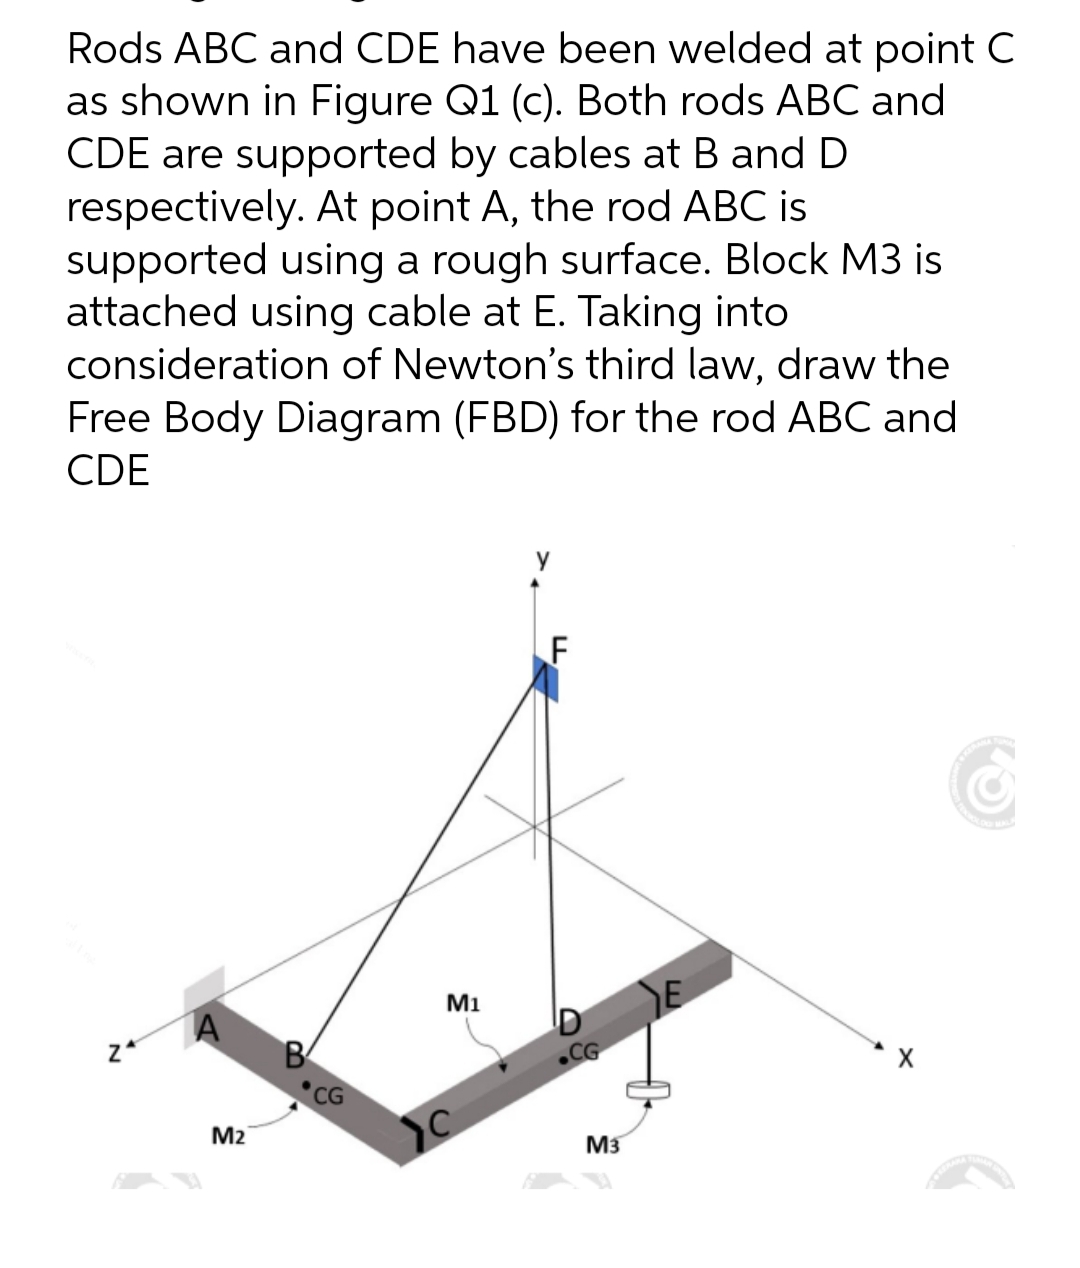 Rods ABC and CDE have been welded at point C
as shown in Figure Q1 (c). Both rods ABC and
CDE are supported by cables at B and D
respectively. At point A, the rod ABC is
supported using a rough surface. Block M3 is
attached using cable at E. Taking into
consideration of Newton's third law, draw the
Free Body Diagram (FBD) for the rod ABC and
CDE
Z*
M₂
M1
F
CG
M3